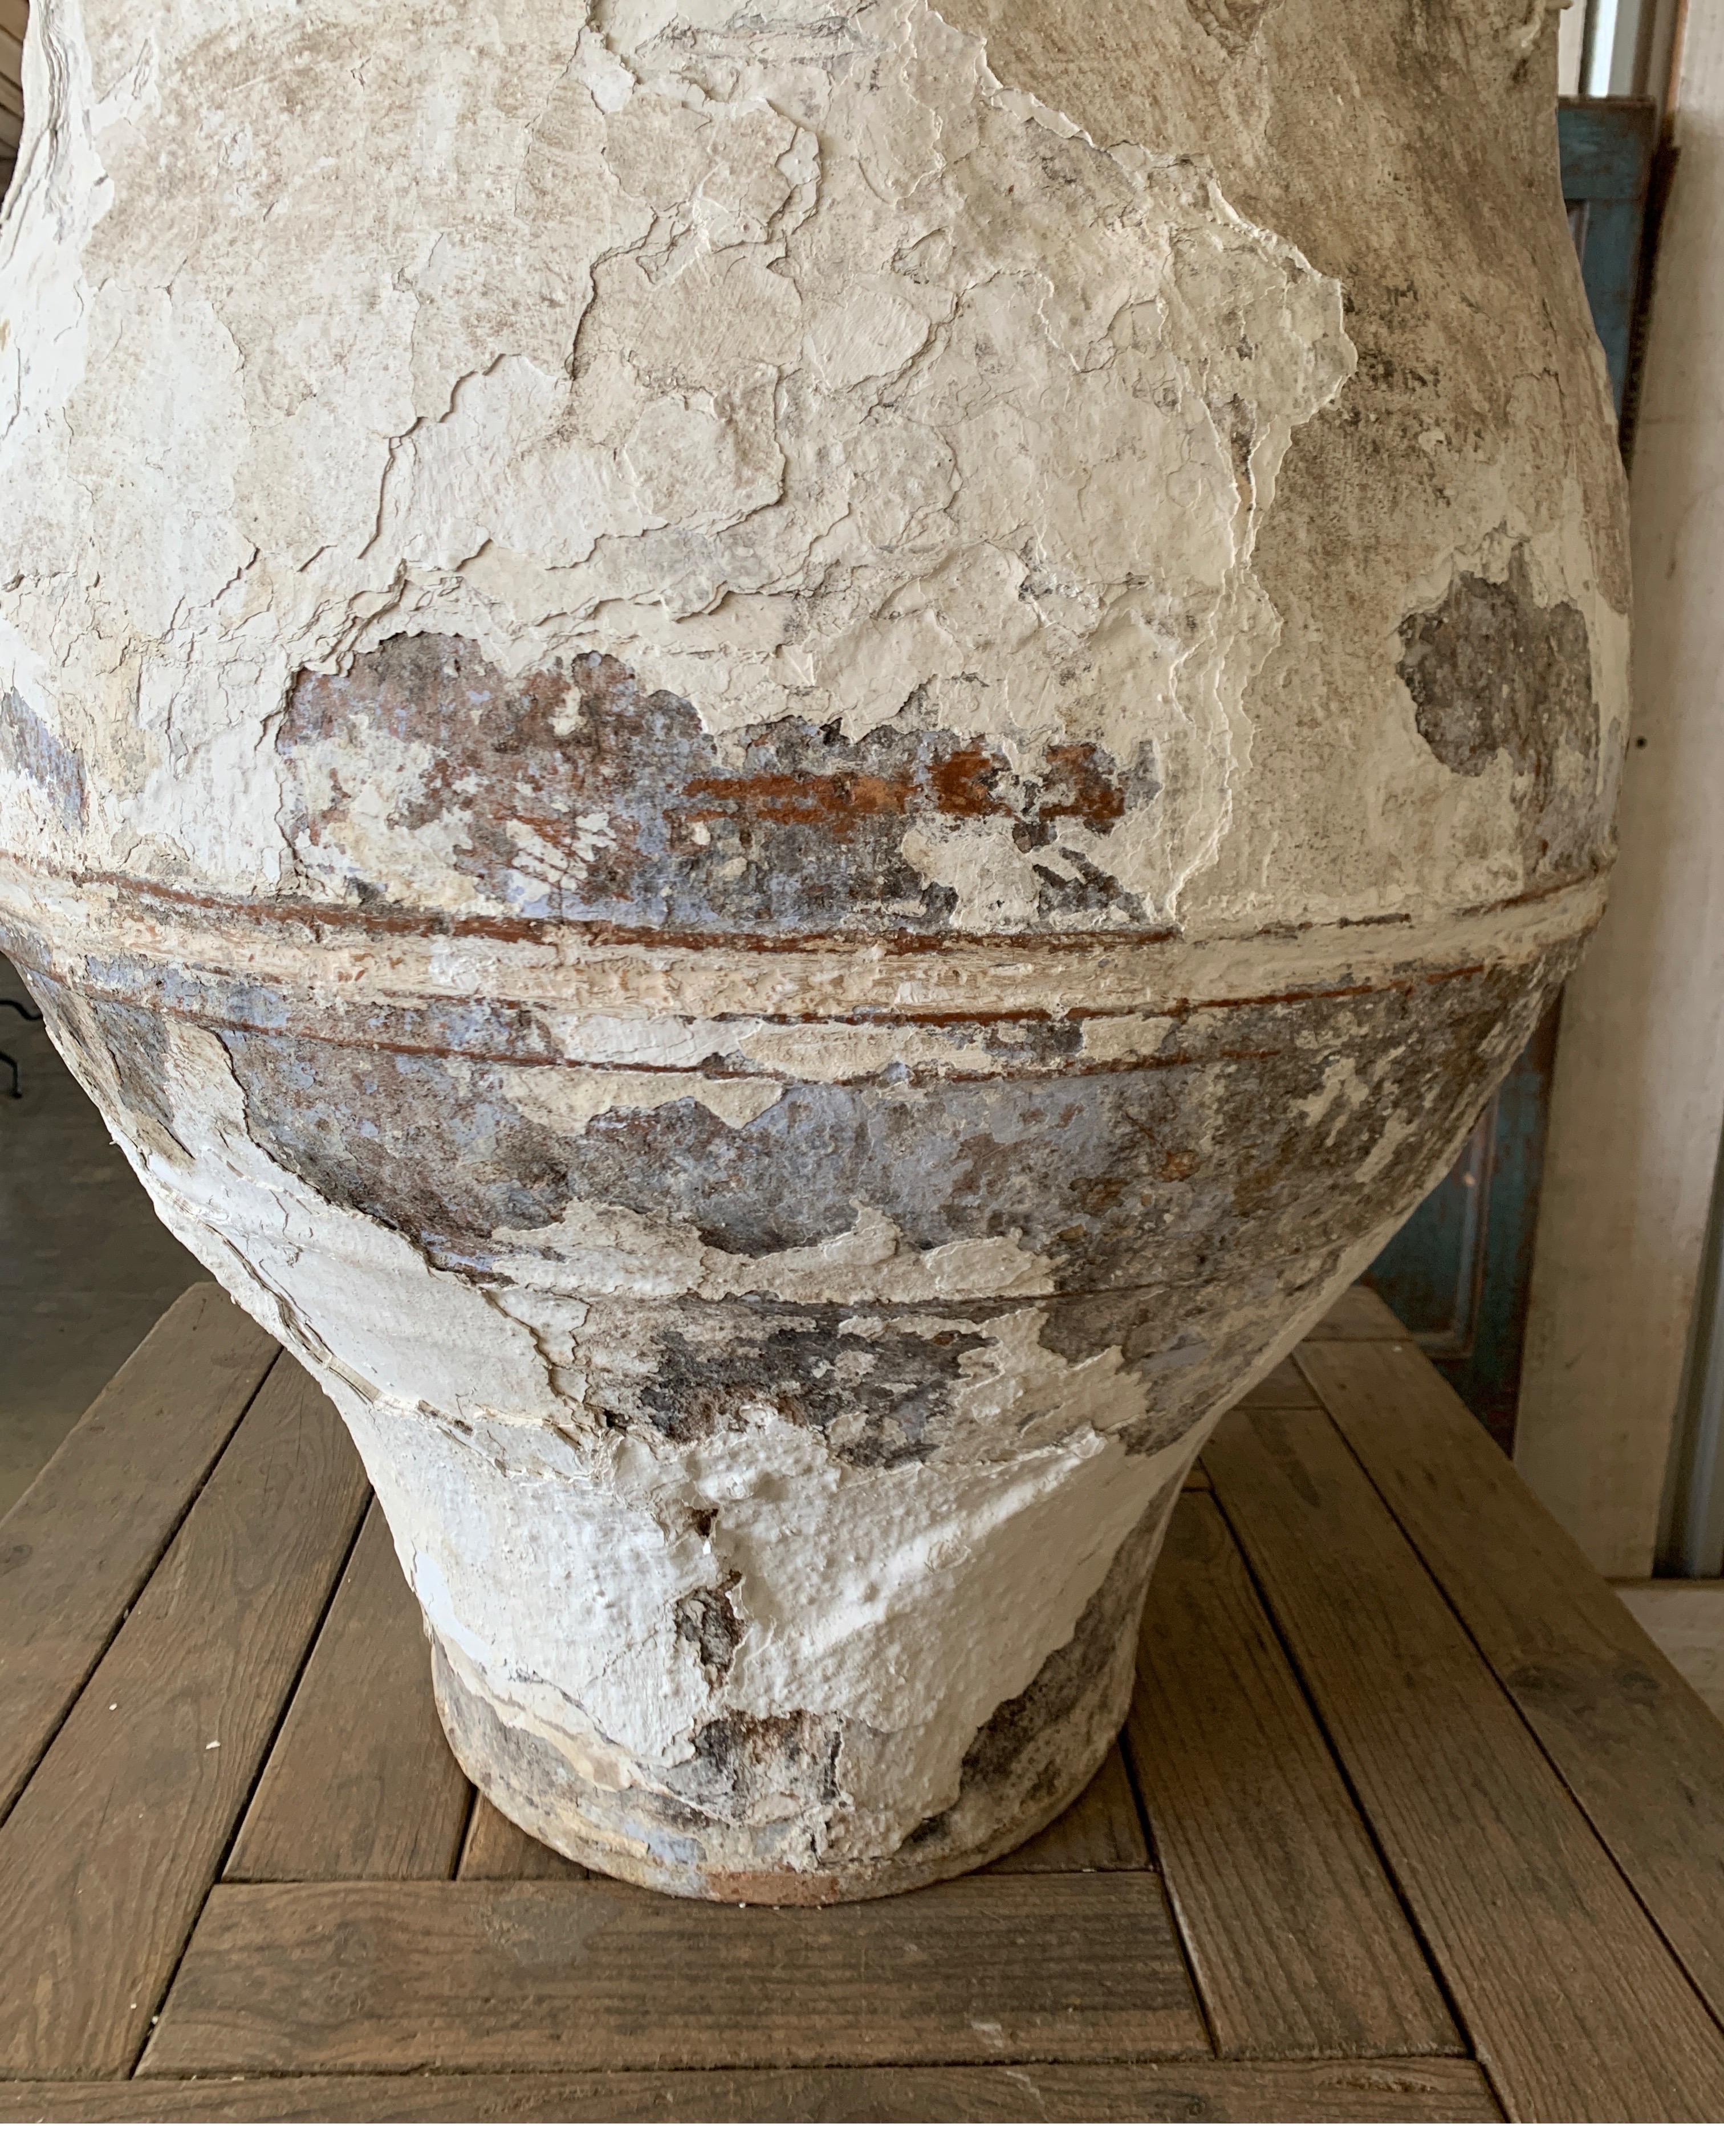 This beautiful olive jar is large in scale and originates from Greece. It has a wonderful plastered white finish with a few hints of blue. Mouth opening is 20 inches width, bottom bases is 15 diameter. Measures: 40.38 tall x 31 wide x 31 deep.